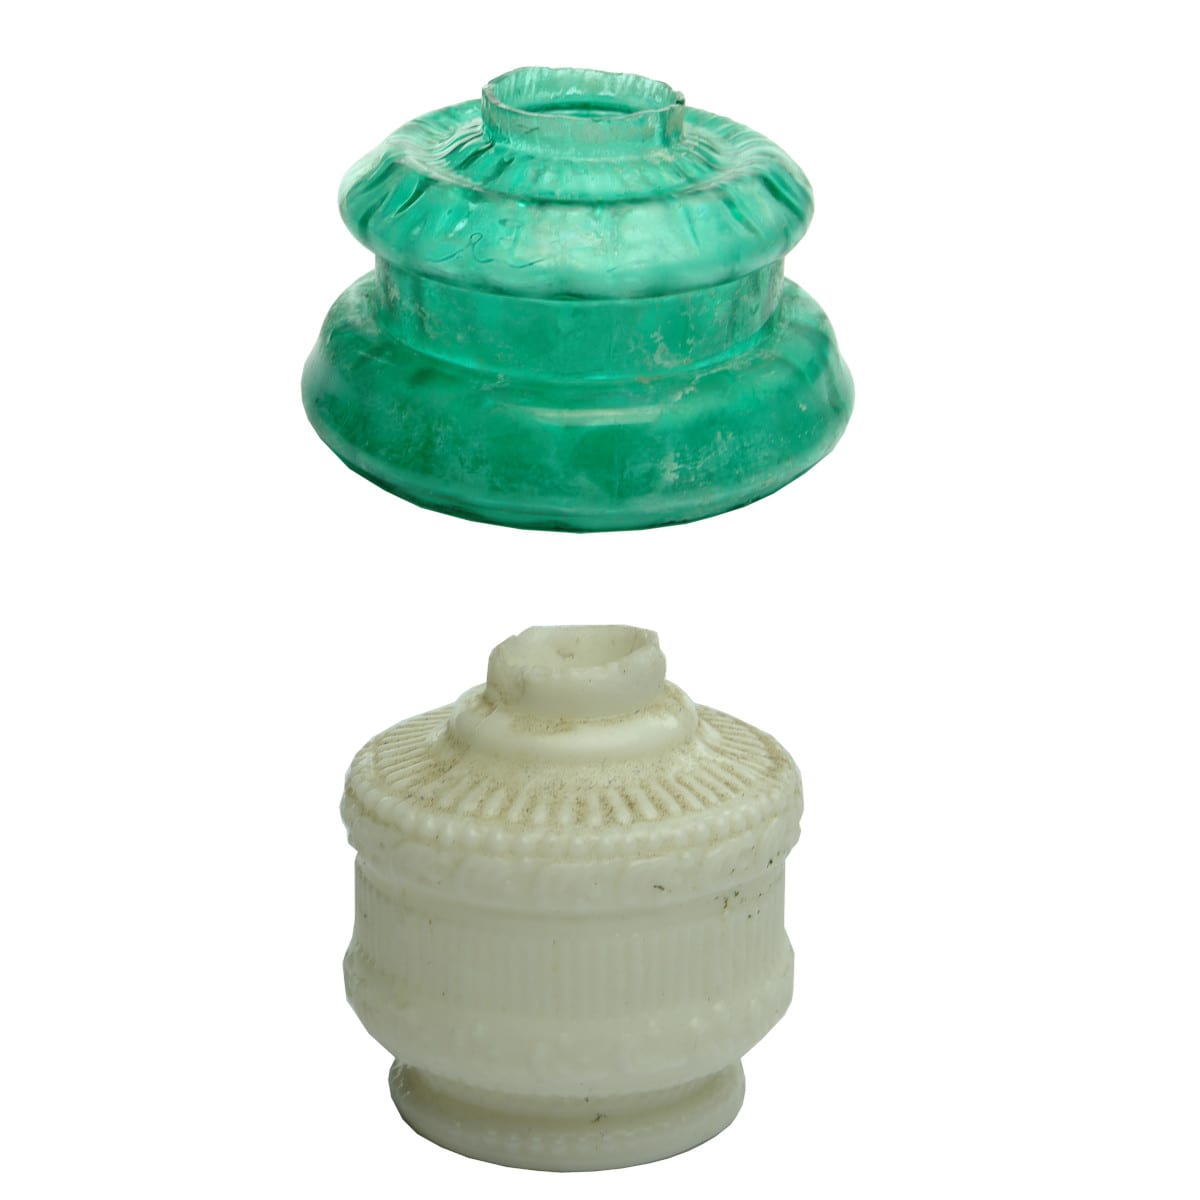 2 Lamps: Green lamp bowl and an Ornate Milk Glass Nutmeg style.